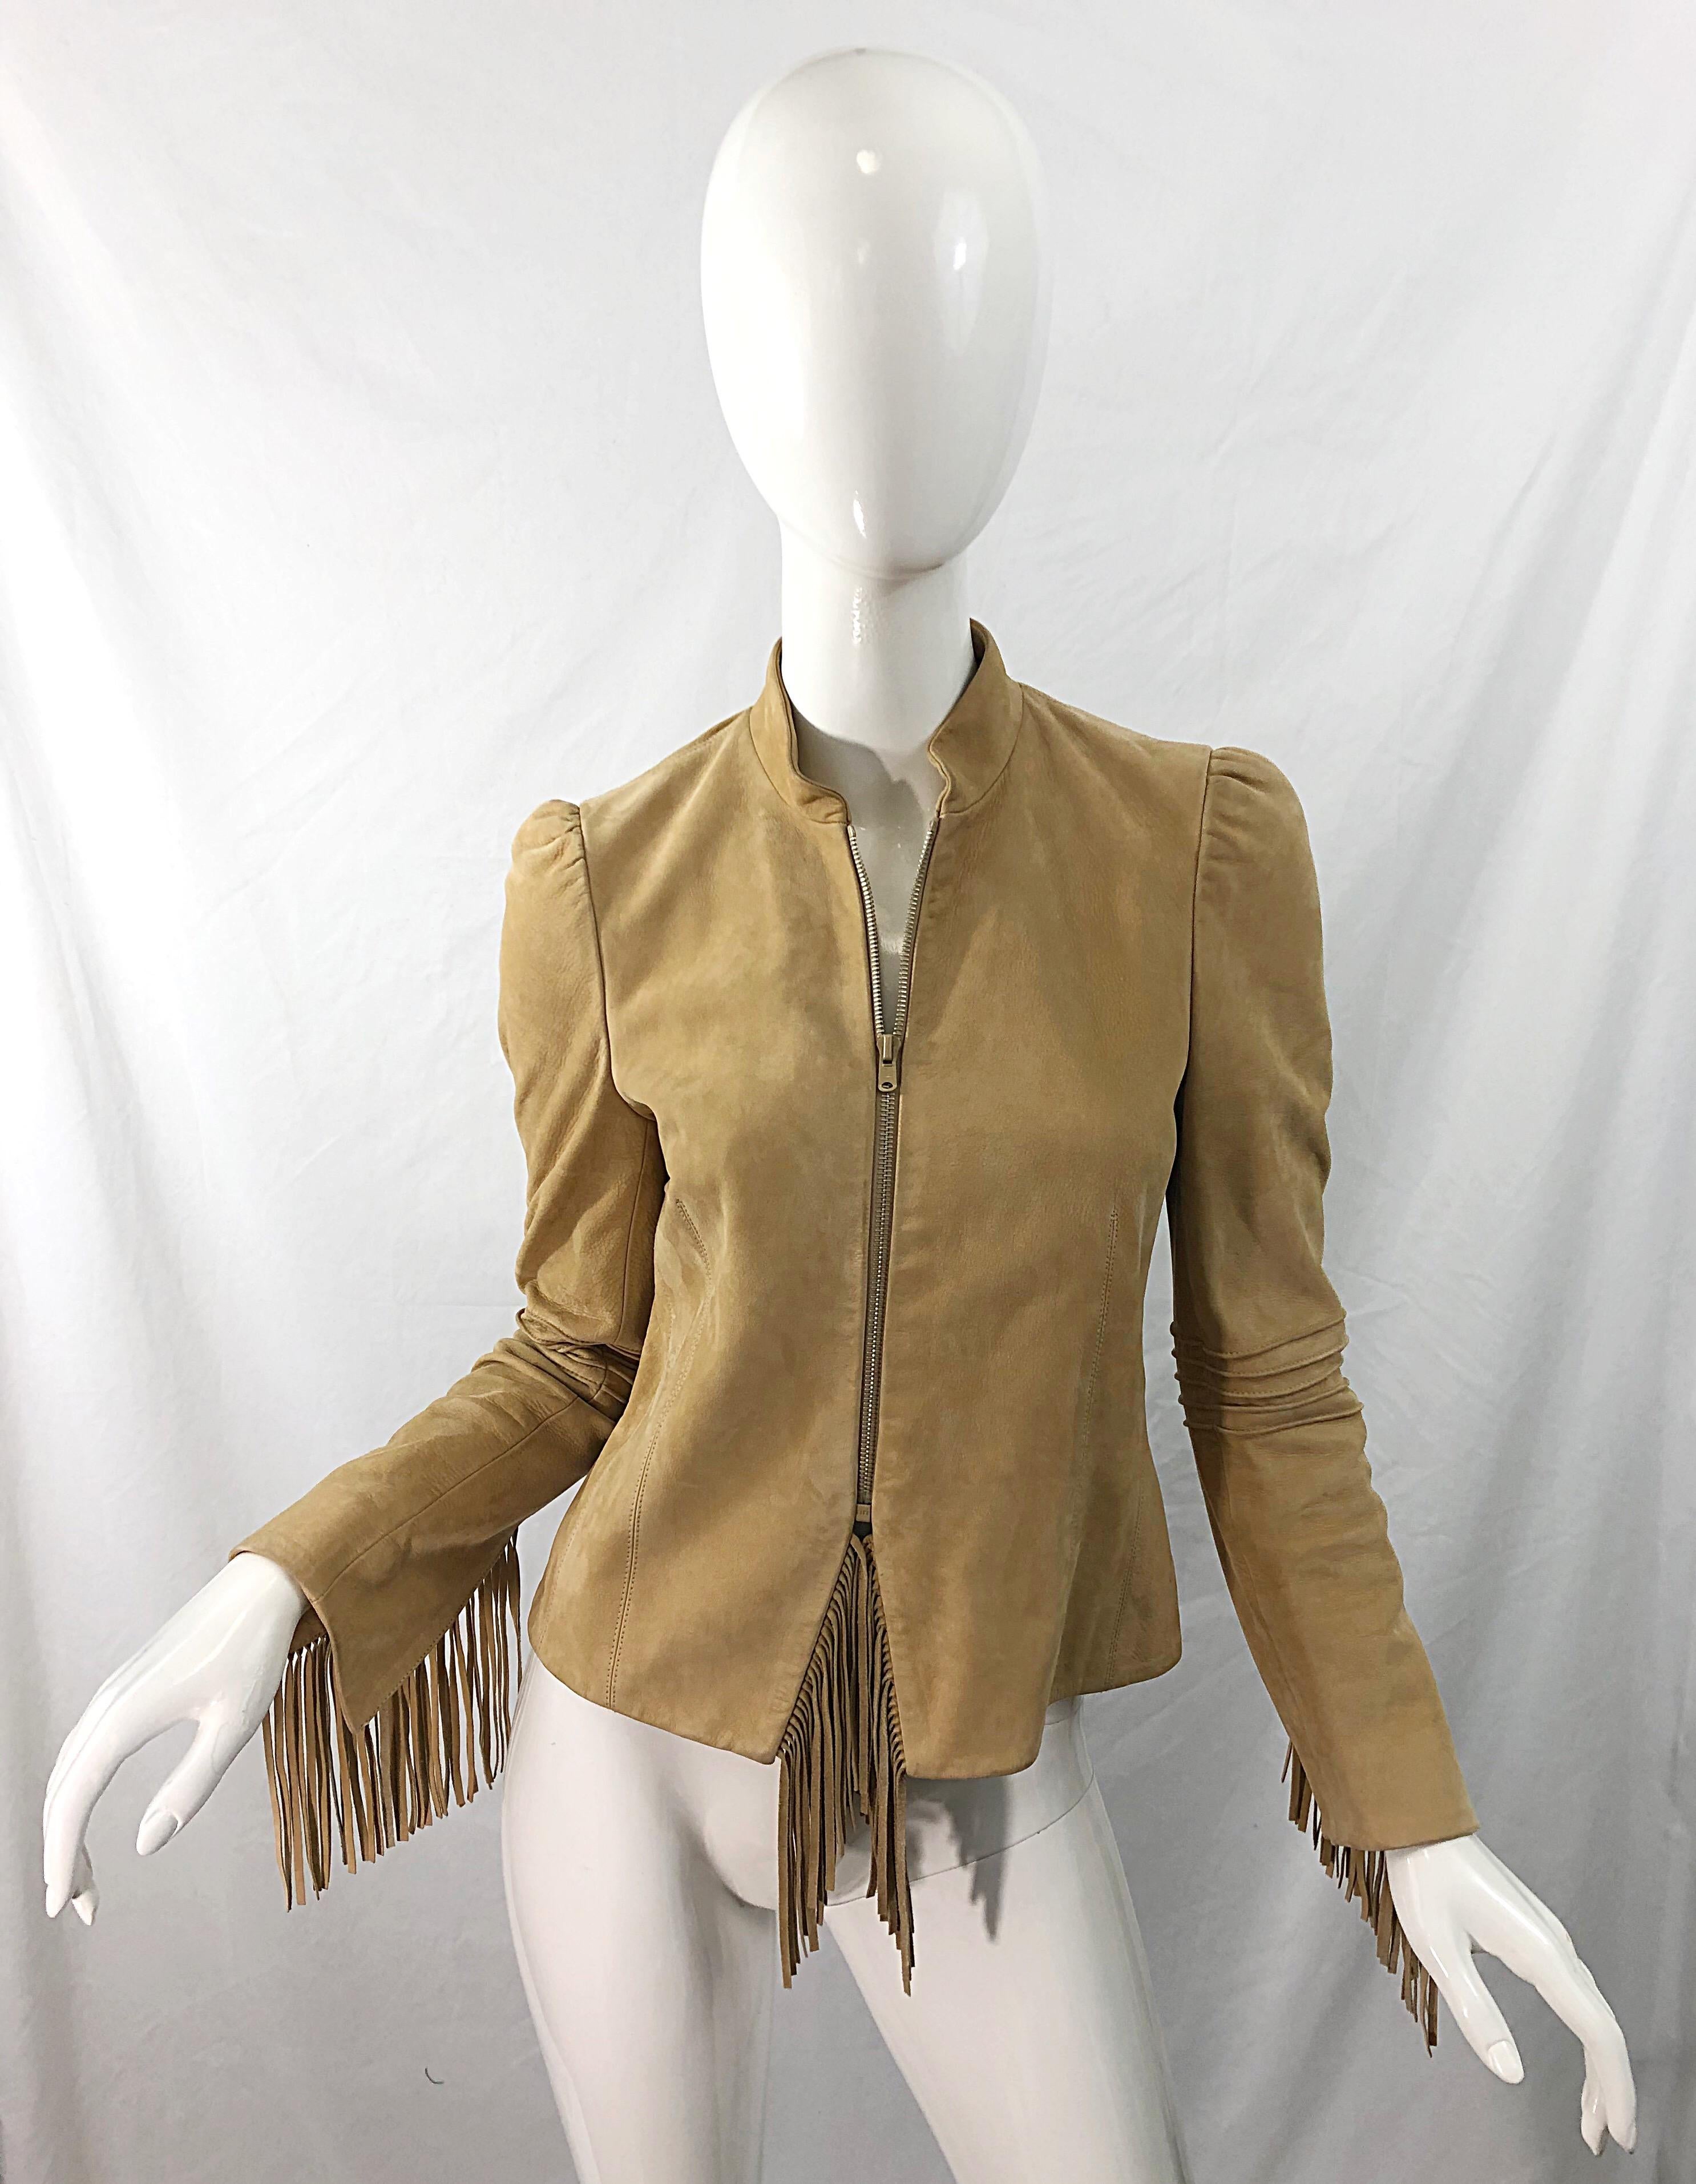 Amazing late 90s vintage KATAYONE ADELI tan nubuck leather fringe moto jacket ! I have been fortunate enough to have had this piece years ago, and it sold in a flash. Smart tailored flattering fit. Full zipper up the front. Fringe under the zipper,